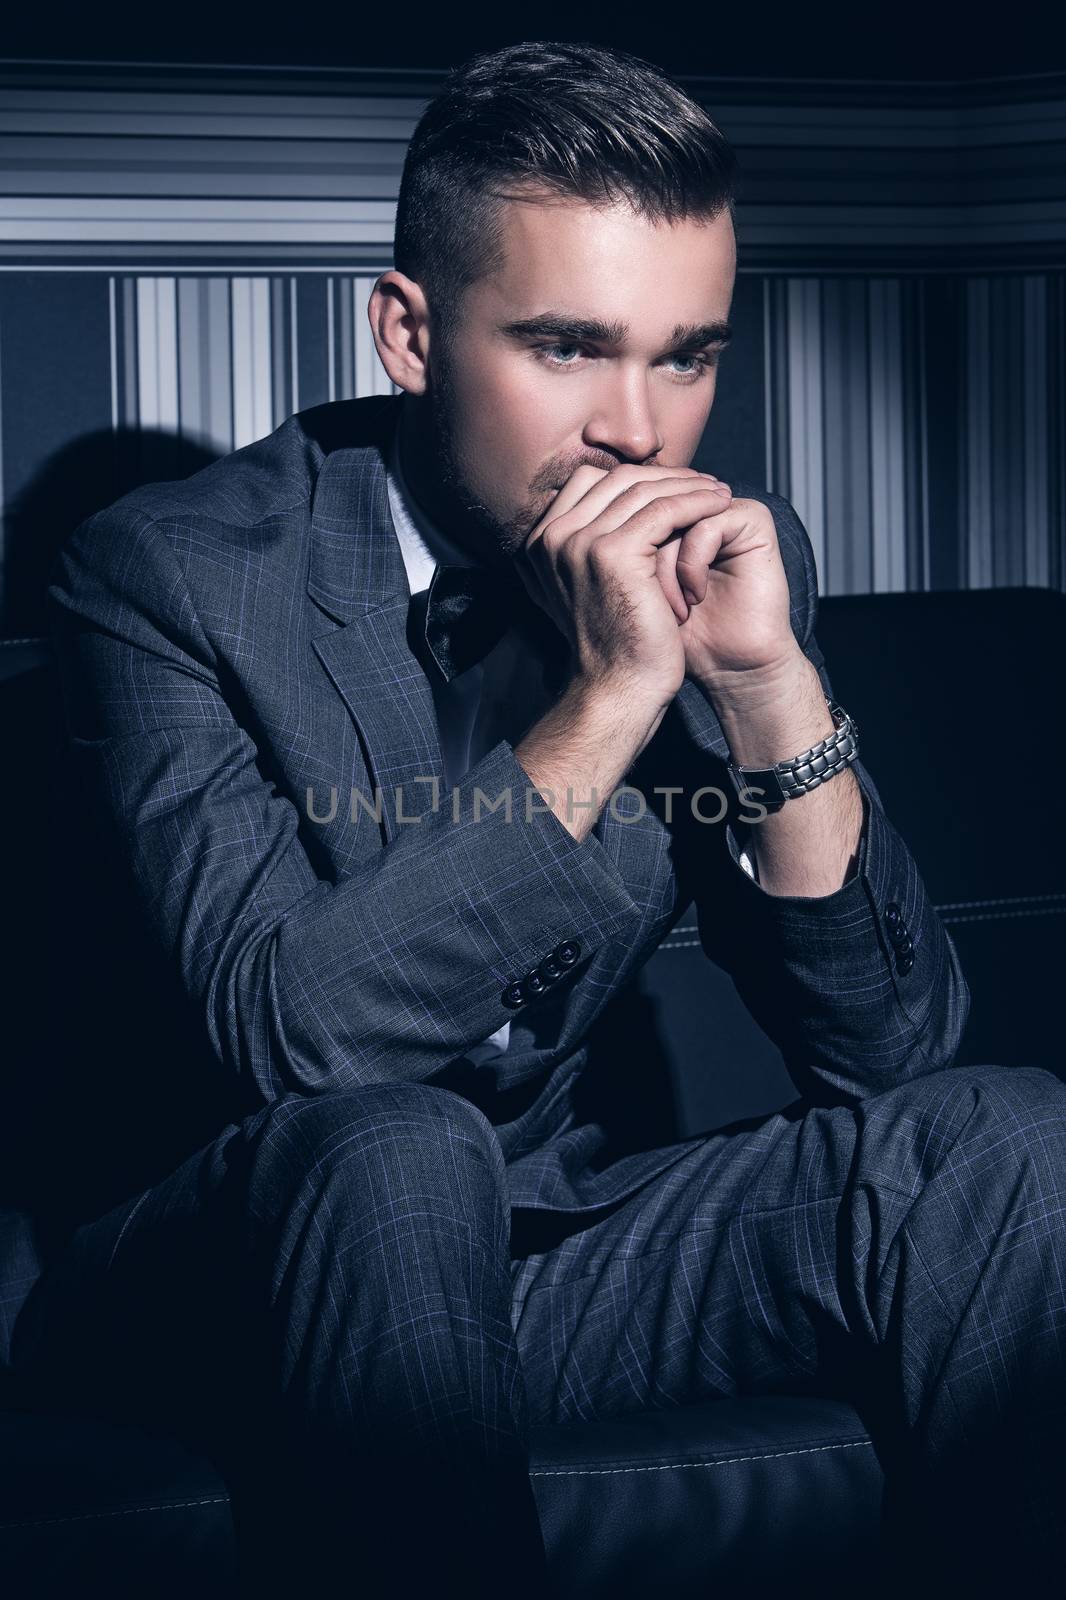 Portrait of a handsome man in a suit who sits in the spotlight over a striped background